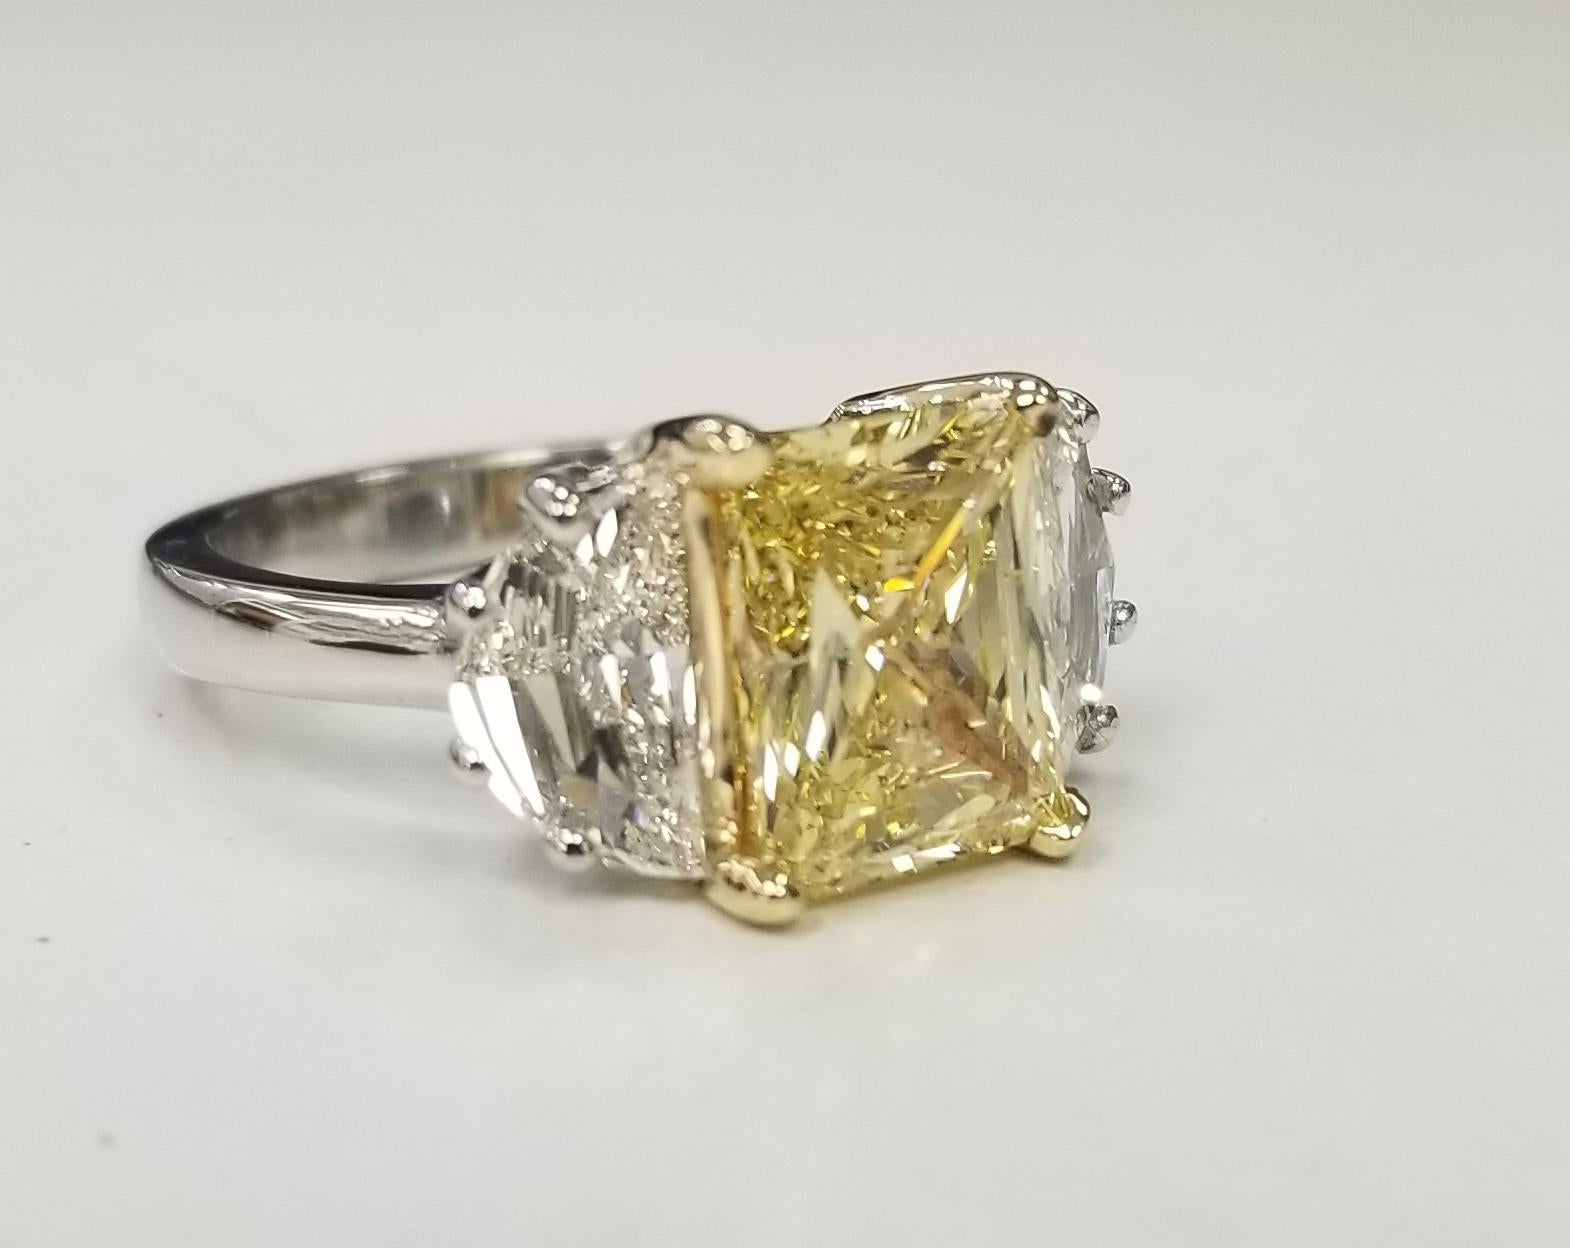  Specifications:
    main stone: GIA Certified Rectangular FANCY INTENSE YELLOW 2.79 CARAT
    DIAMONDS: 2 Half Moons 1.04cts. Color F VS
    carat total weight: 2.79 CARAT TOTAL WEIGHT
    color: FANCY INTENSE YELLOW 
    metal: Platinum and 18k